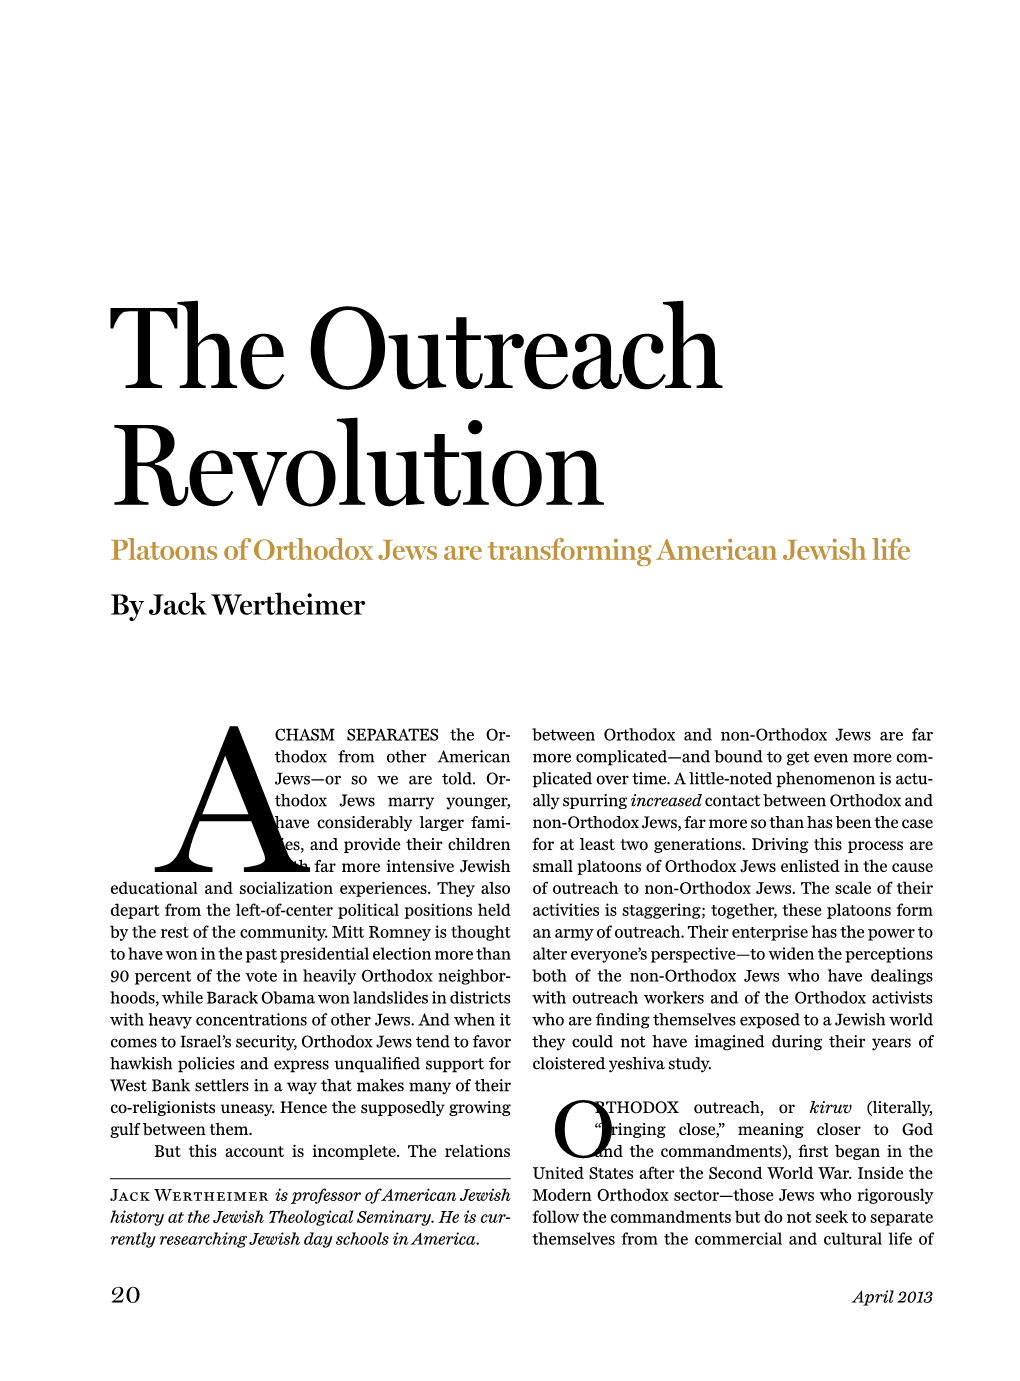 The Outreach Revolution Platoons of Orthodox Jews Are Transforming American Jewish Life by Jack Wertheimer